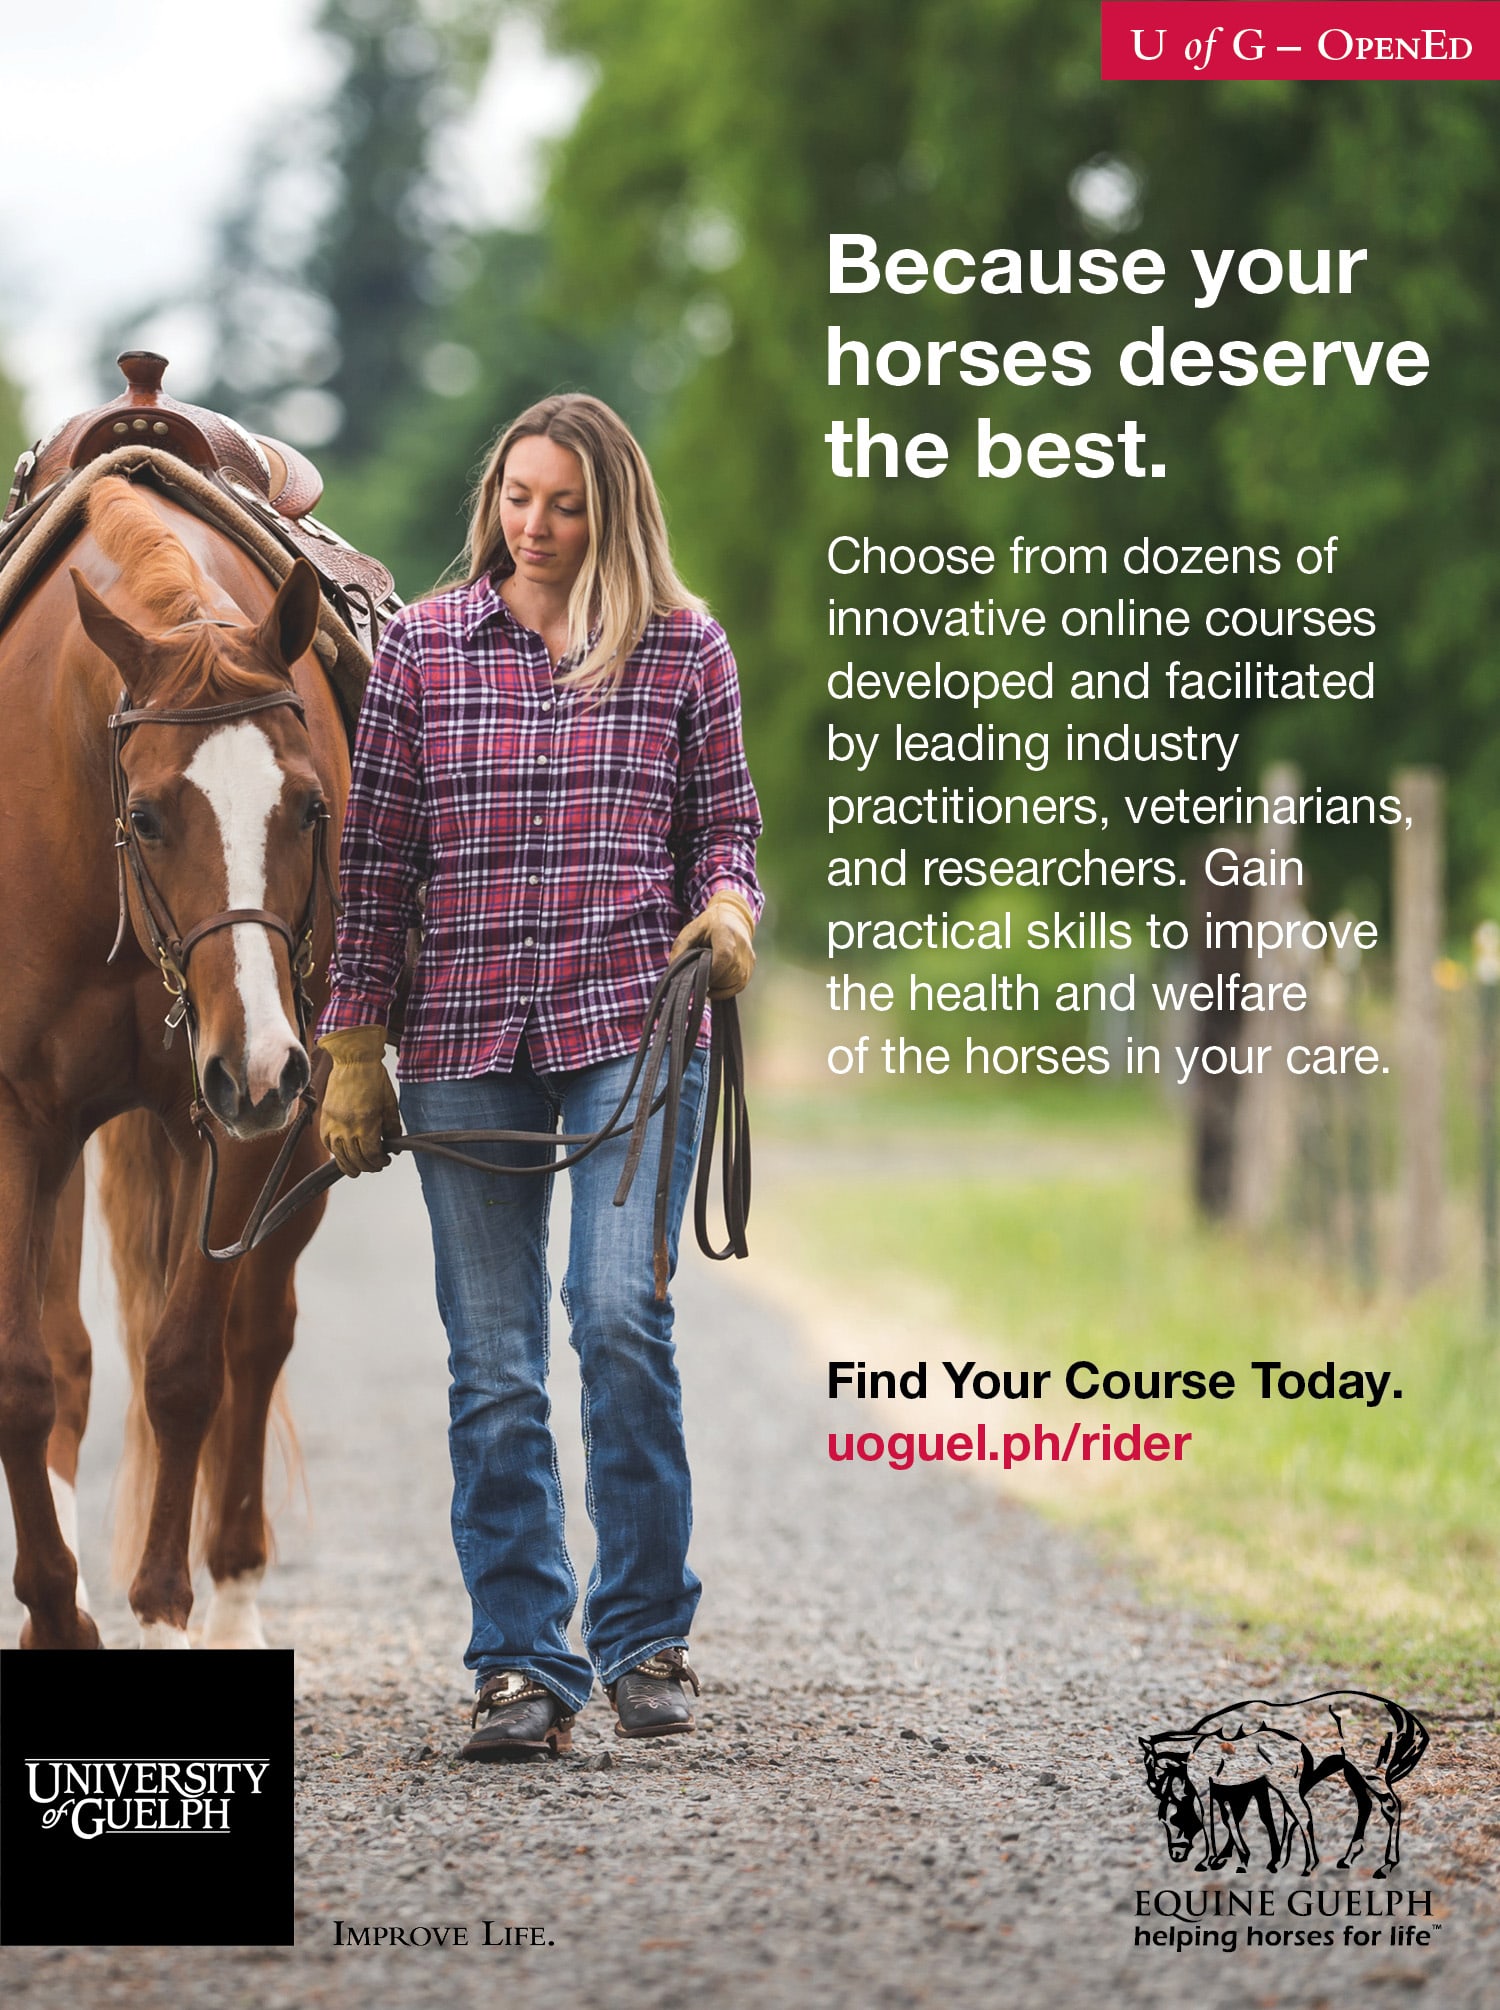 University of Guelph Equine Certificate and Diploma Programs